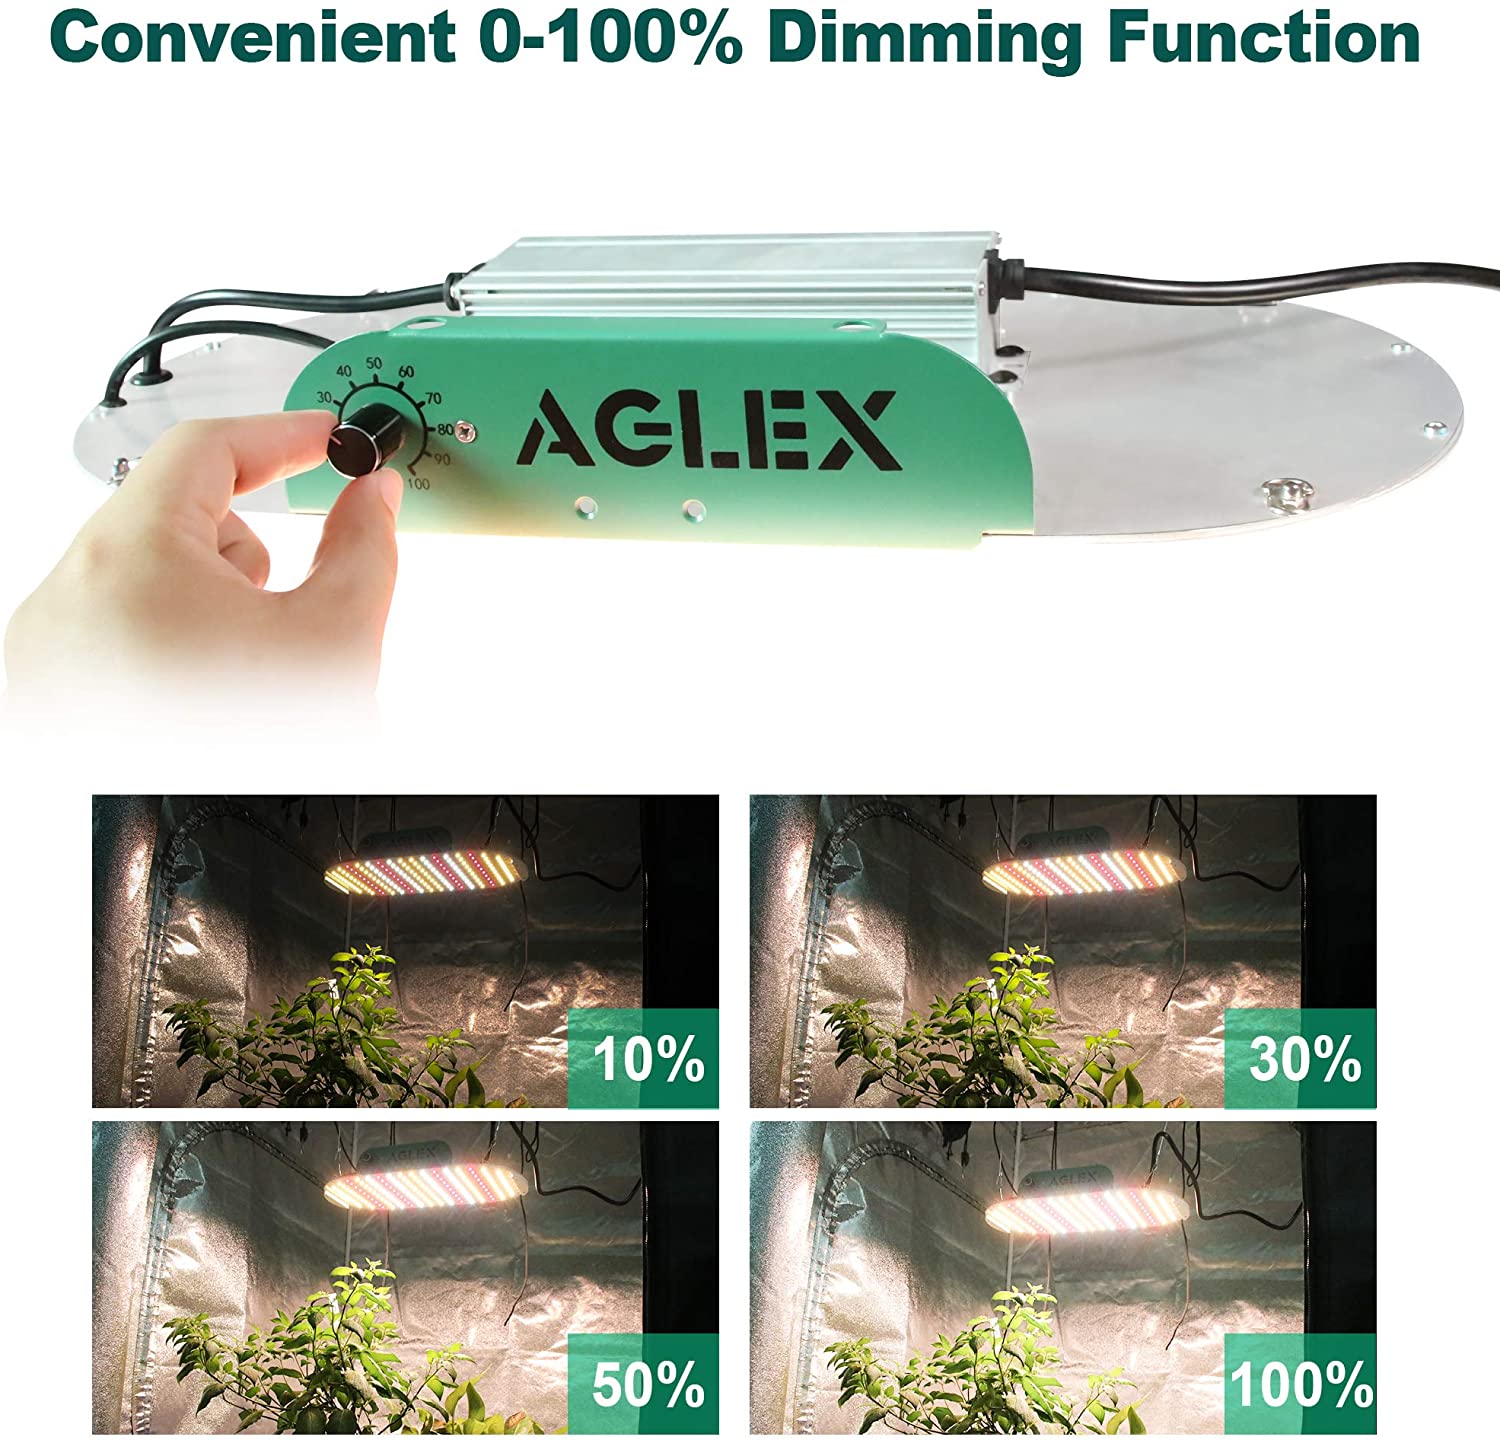 AGLEX K Series LED Plant Grow Light 2X4ft Dimmable Sunlike Full Spectrum with 3030 LEDs & UL Listed IP65 Waterproof Driver